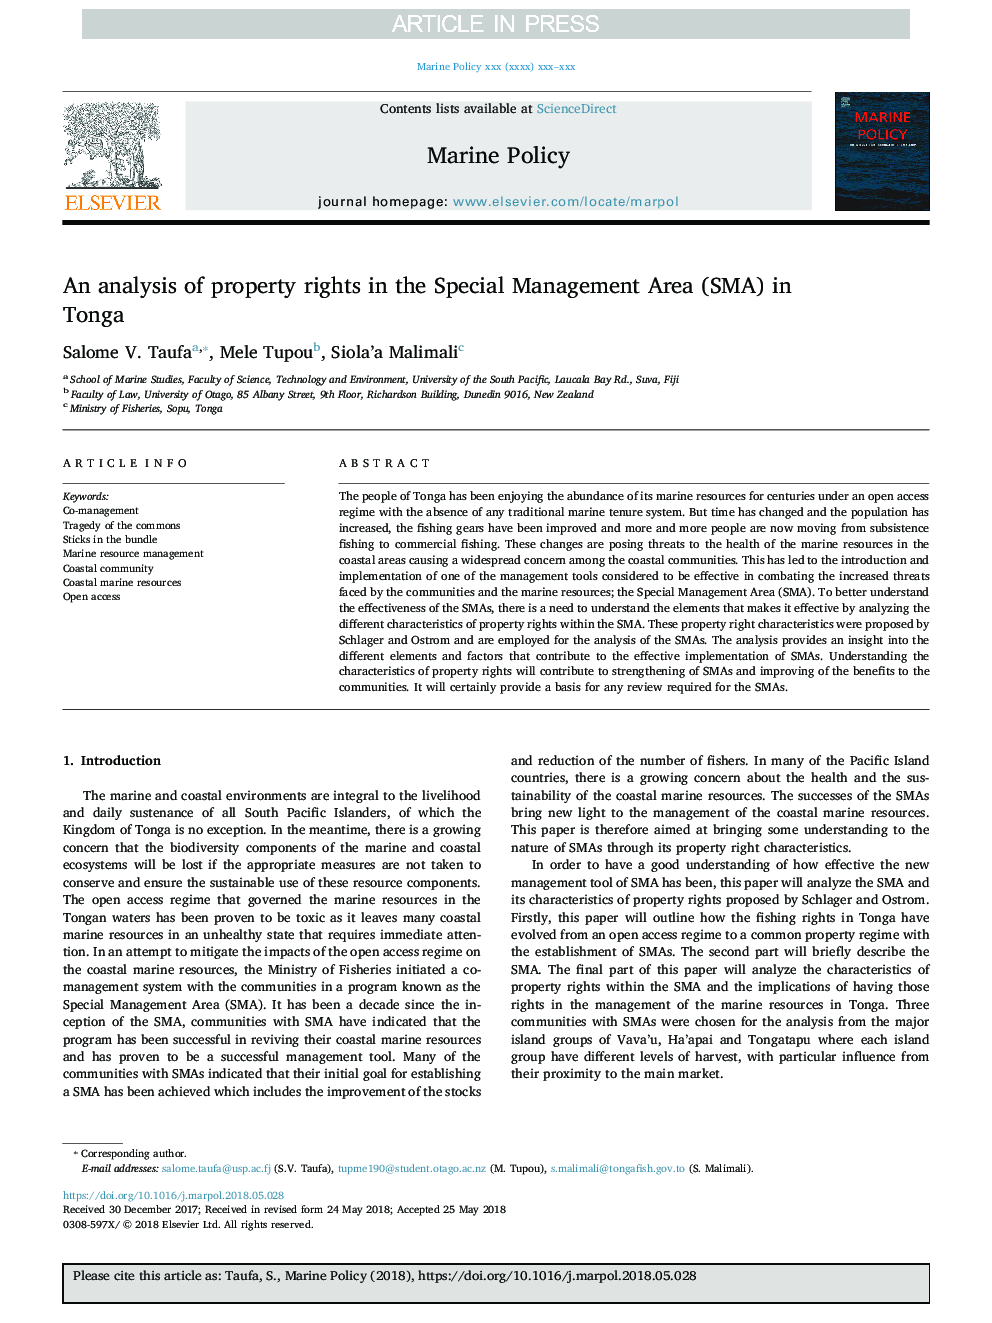 An analysis of property rights in the Special Management Area (SMA) in Tonga